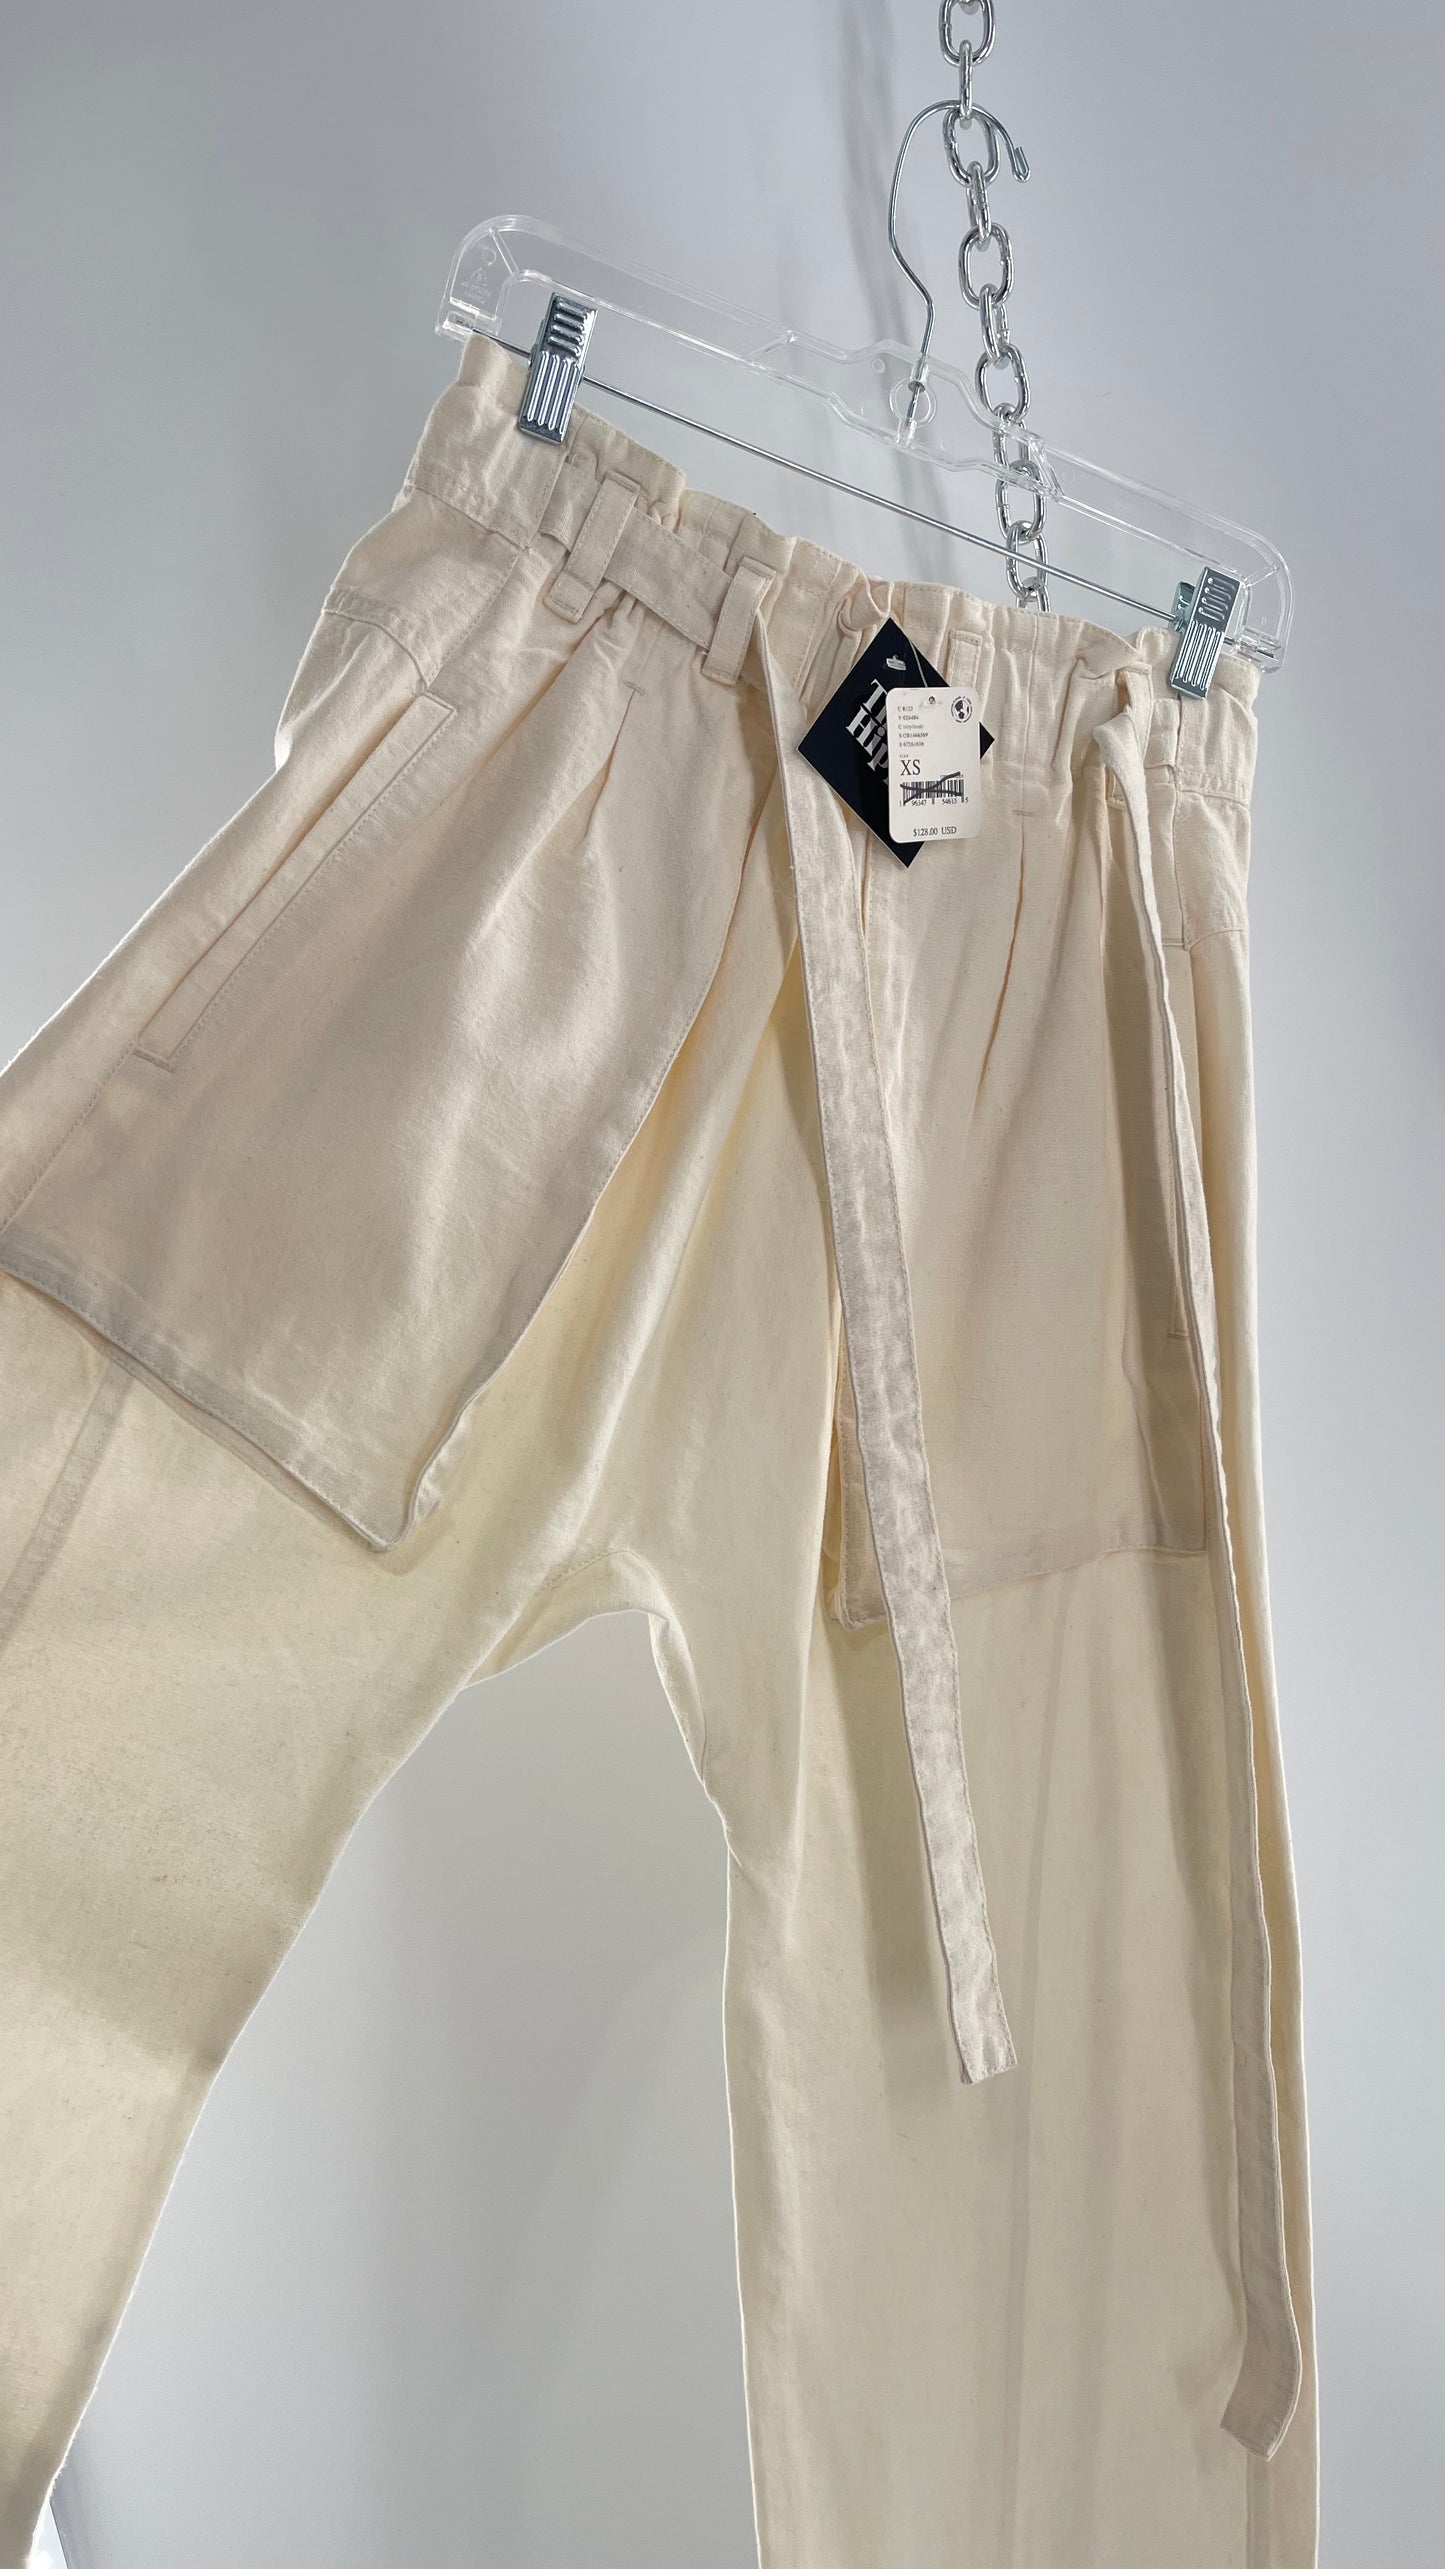 Free People Cream Color Canvas Belted Pants with Oversized Pockets and Tags Attached (XS)